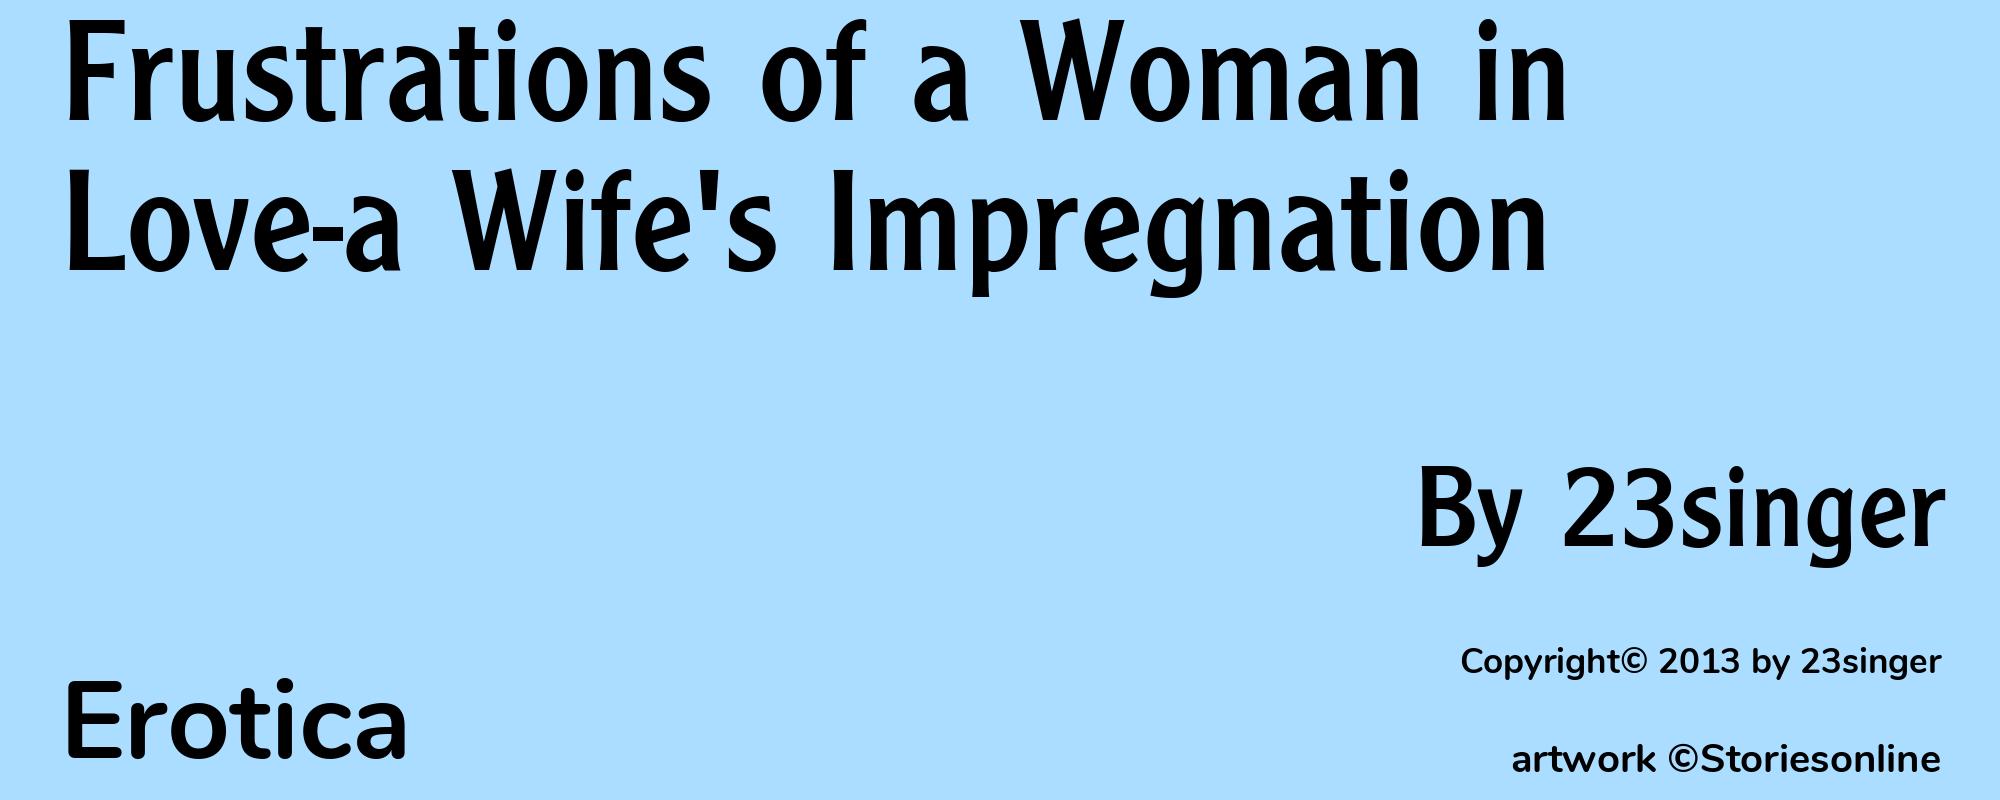 Frustrations of a Woman in Love-a Wife's Impregnation - Cover